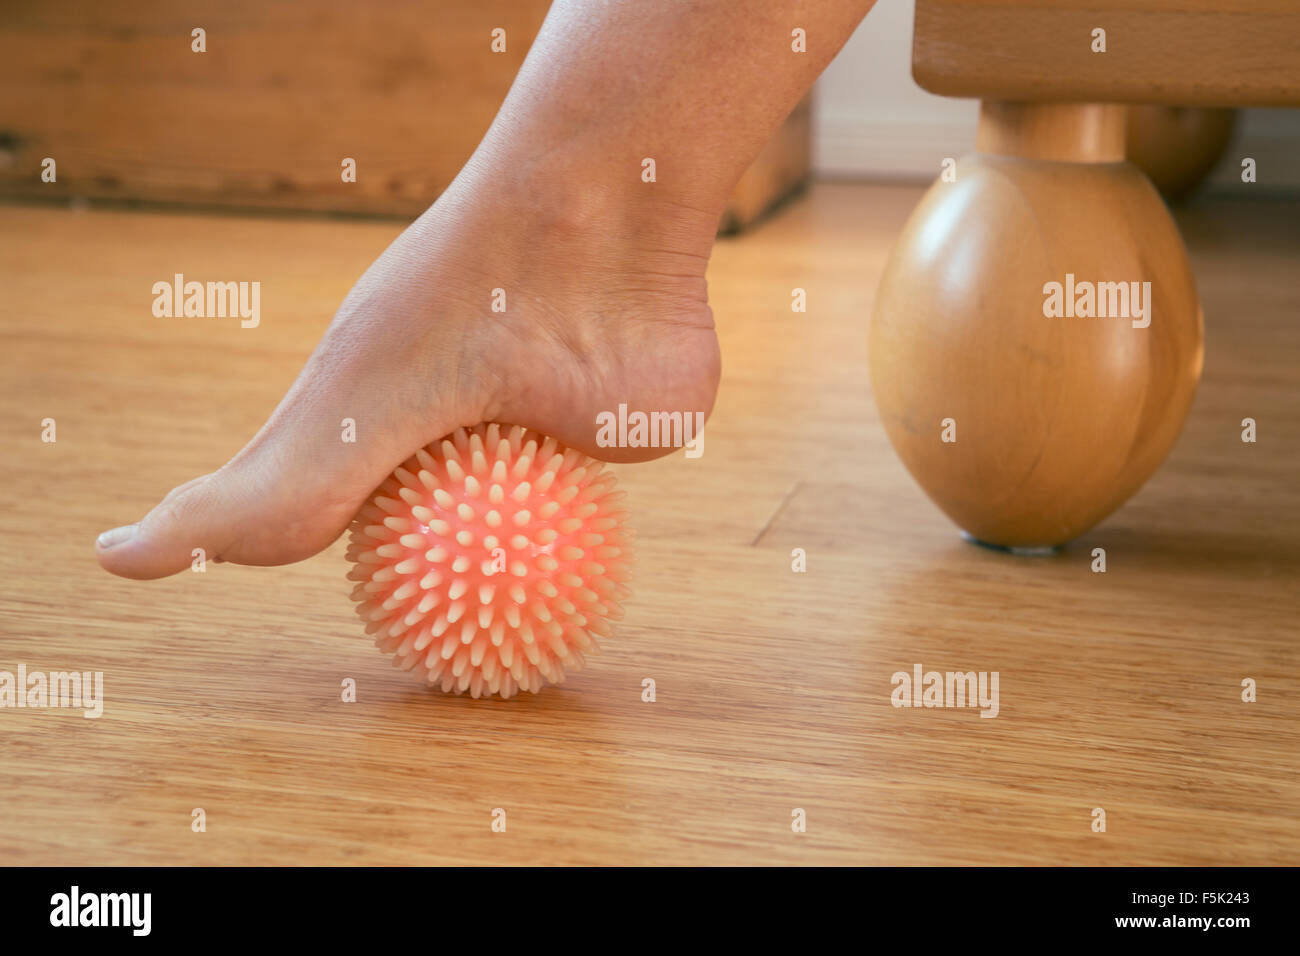 foot in with rubber massage ball Stock Photo